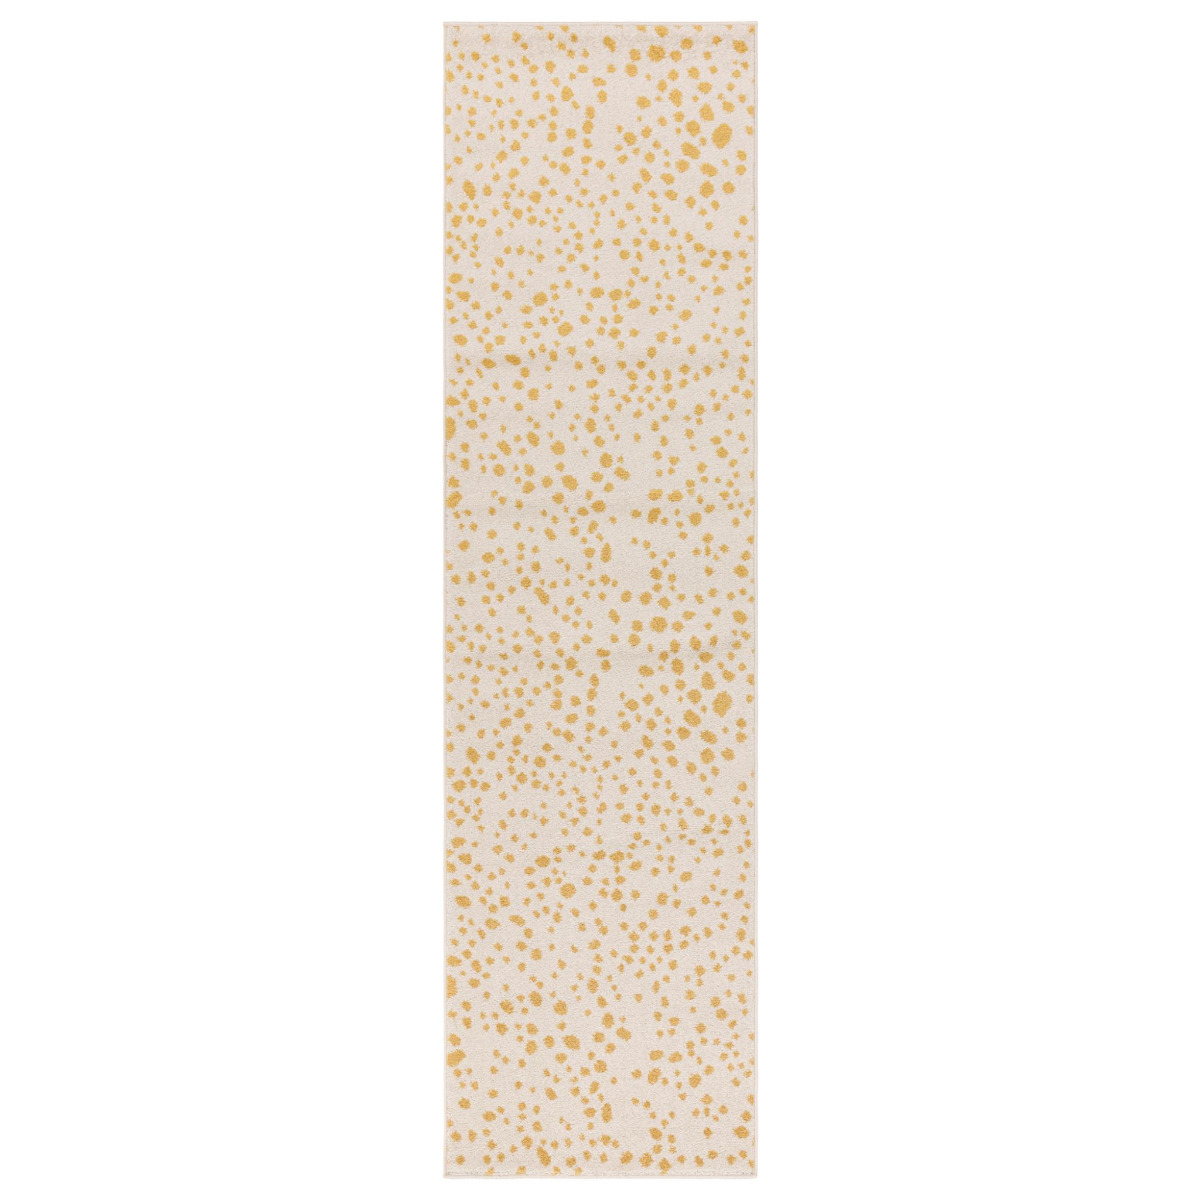 Muse Yellow Spotty Rug 66x240cm